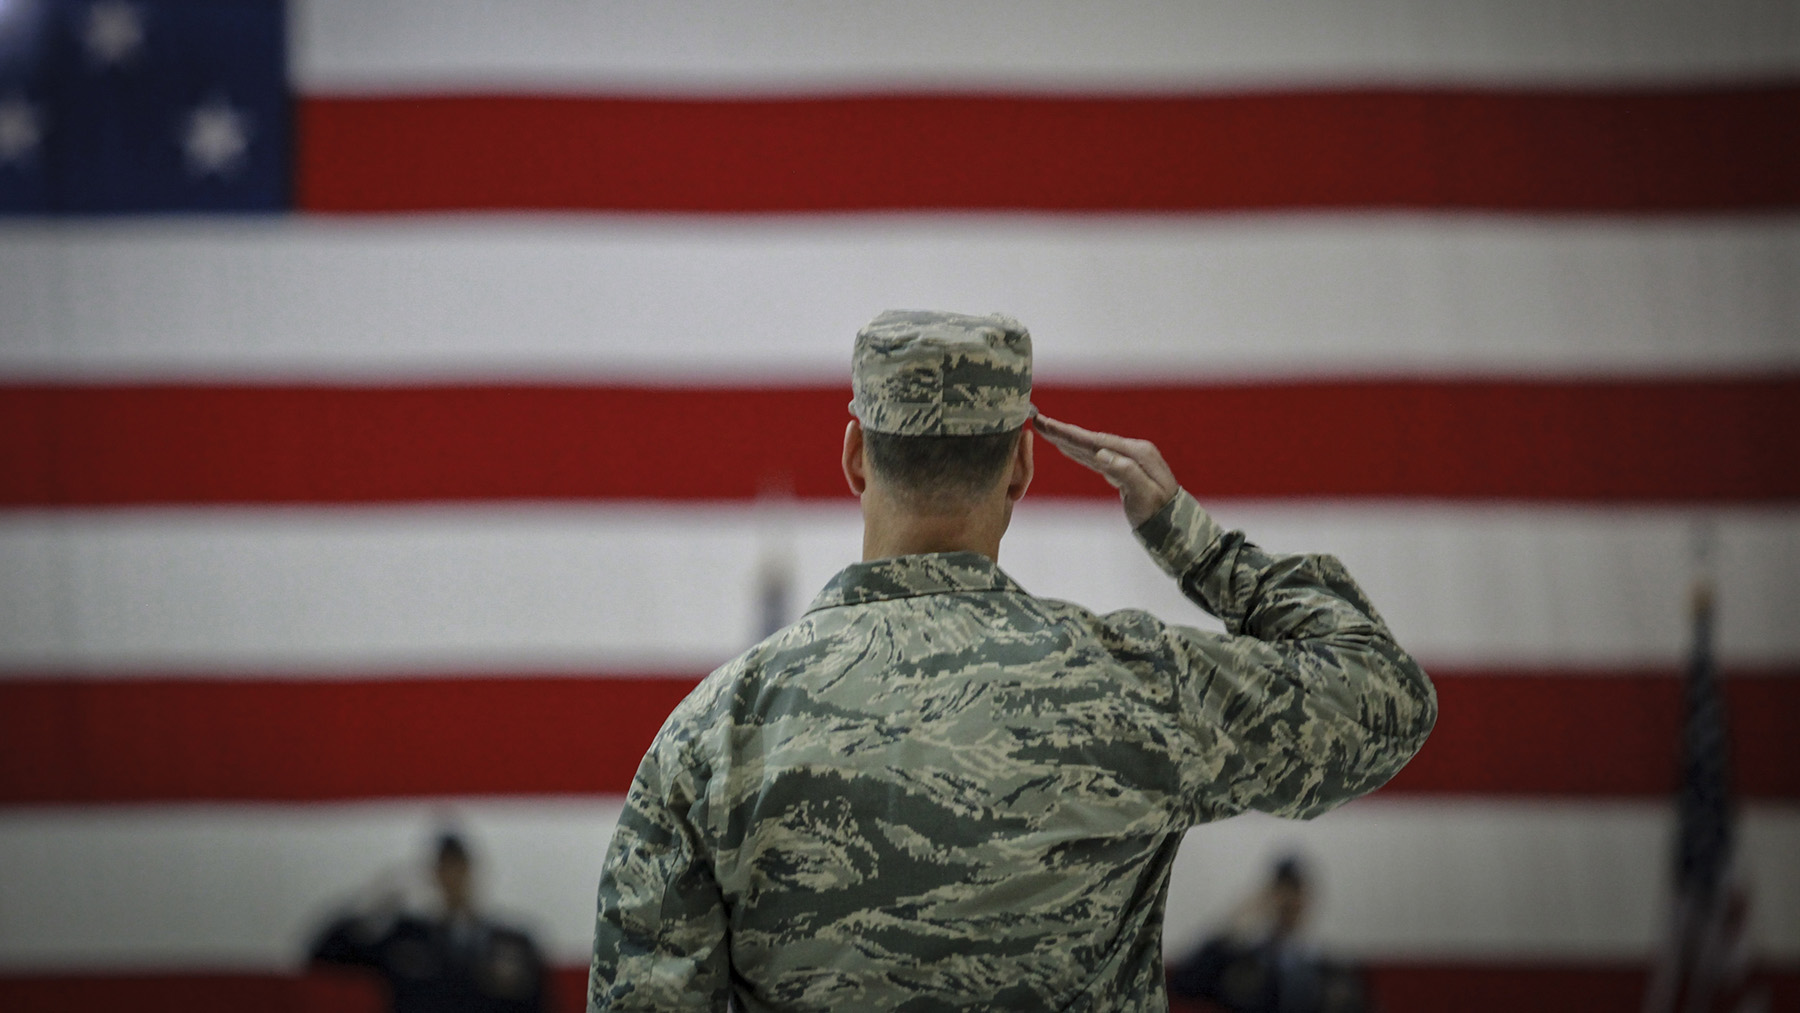 Photo of a U.S. airmen saluting during an assumption of command ceremony. Public domain image, courtesy of RawPixel.com